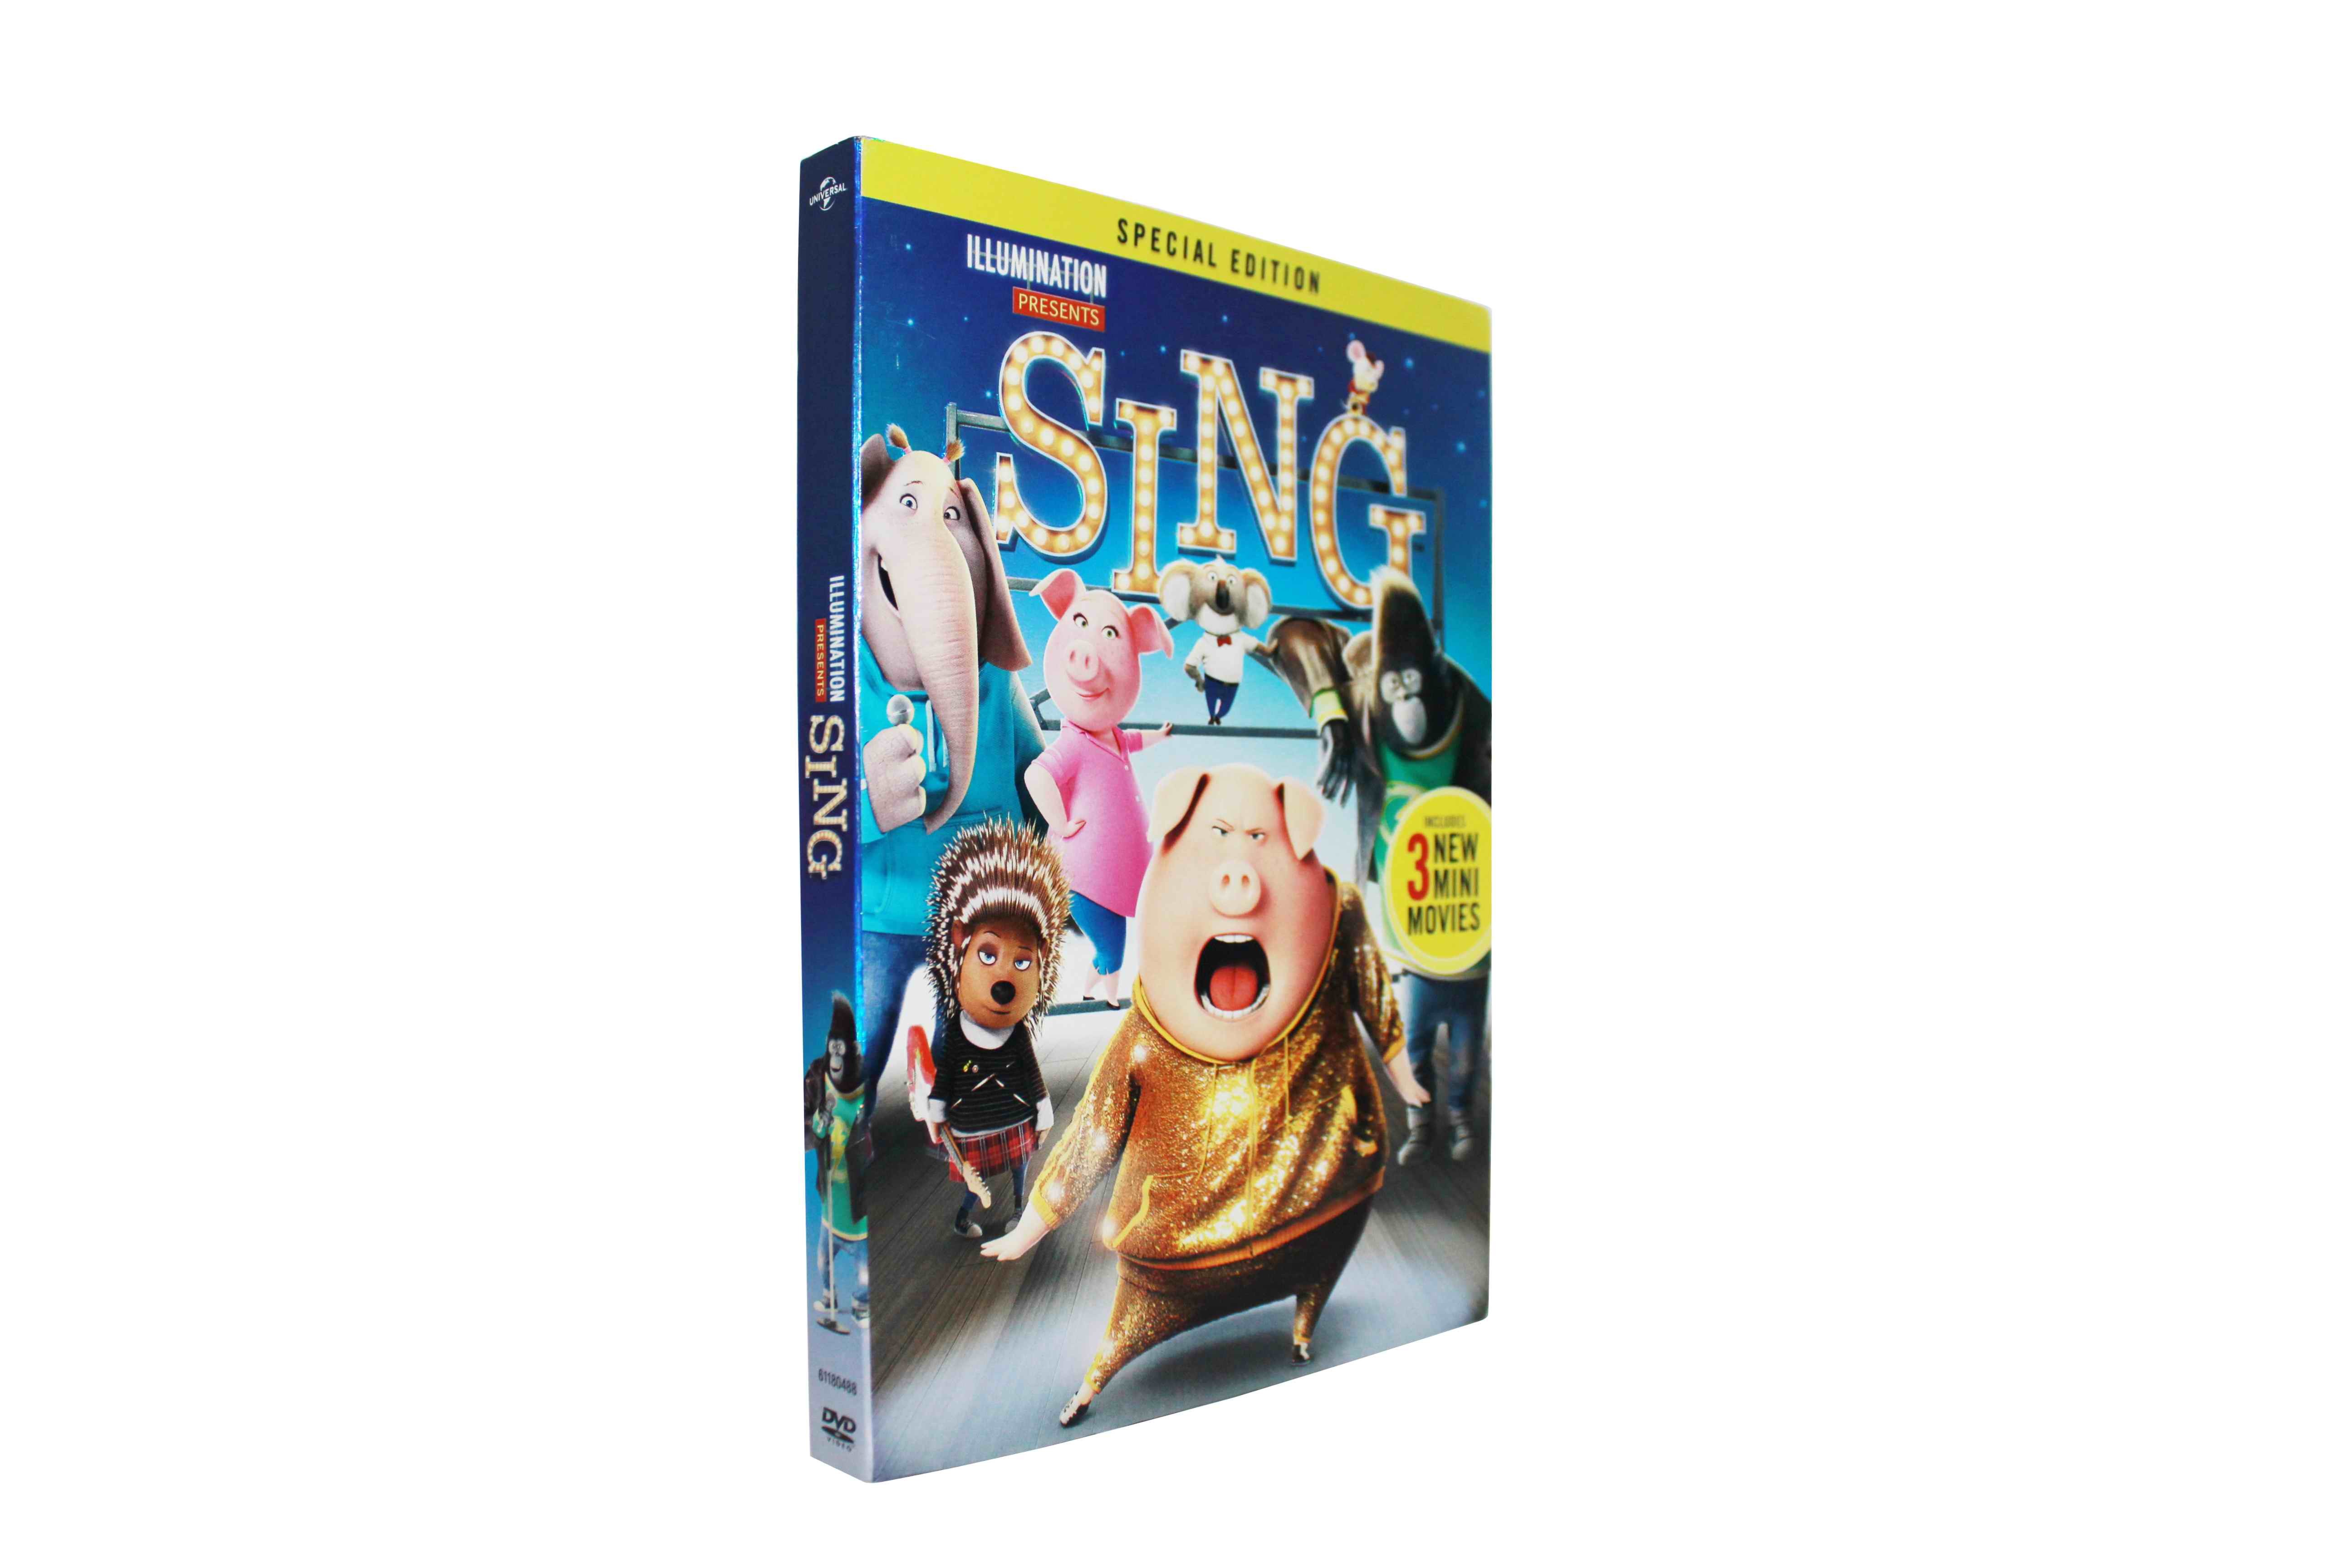 Free DHL Shipping@New Release HOT Cartoon DVD Movies Sing Disney Kids Movies Wholesale,Brand New factory sealed!